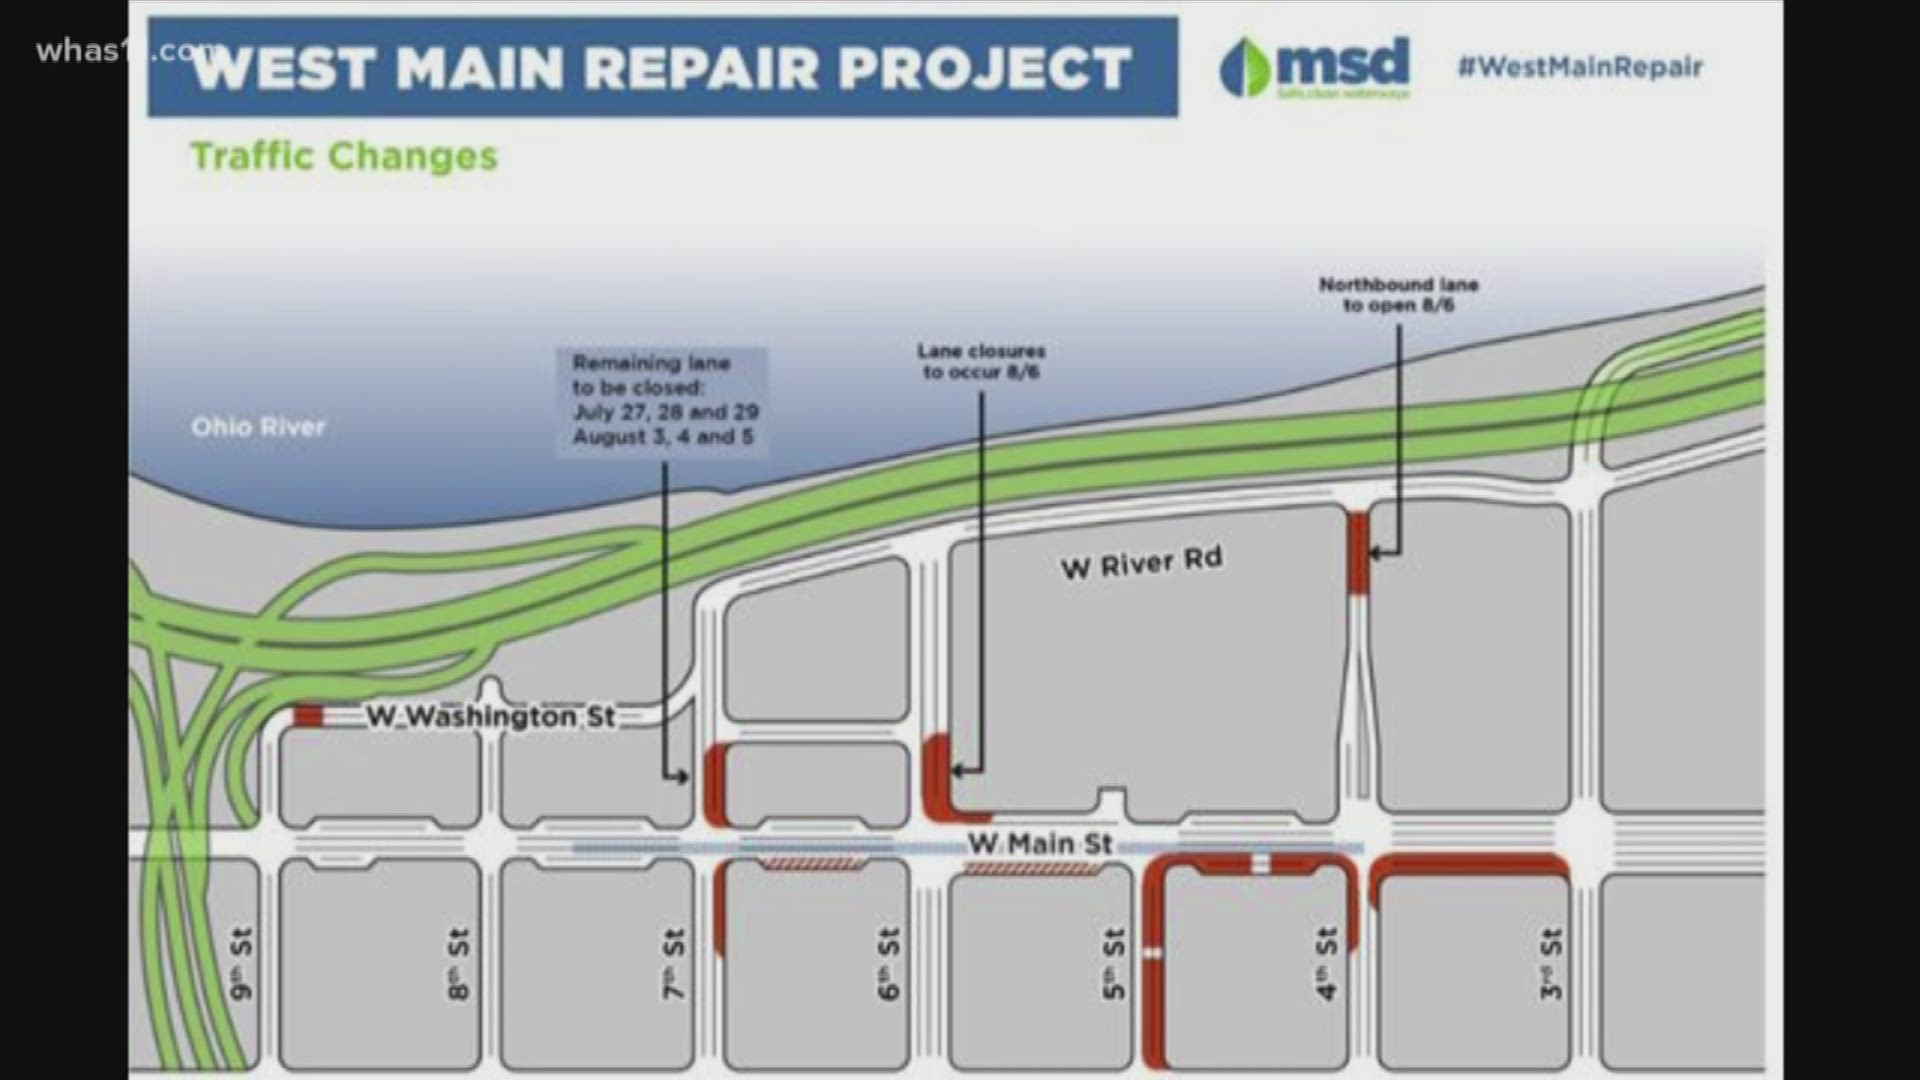 New lane closures planned for Downtown